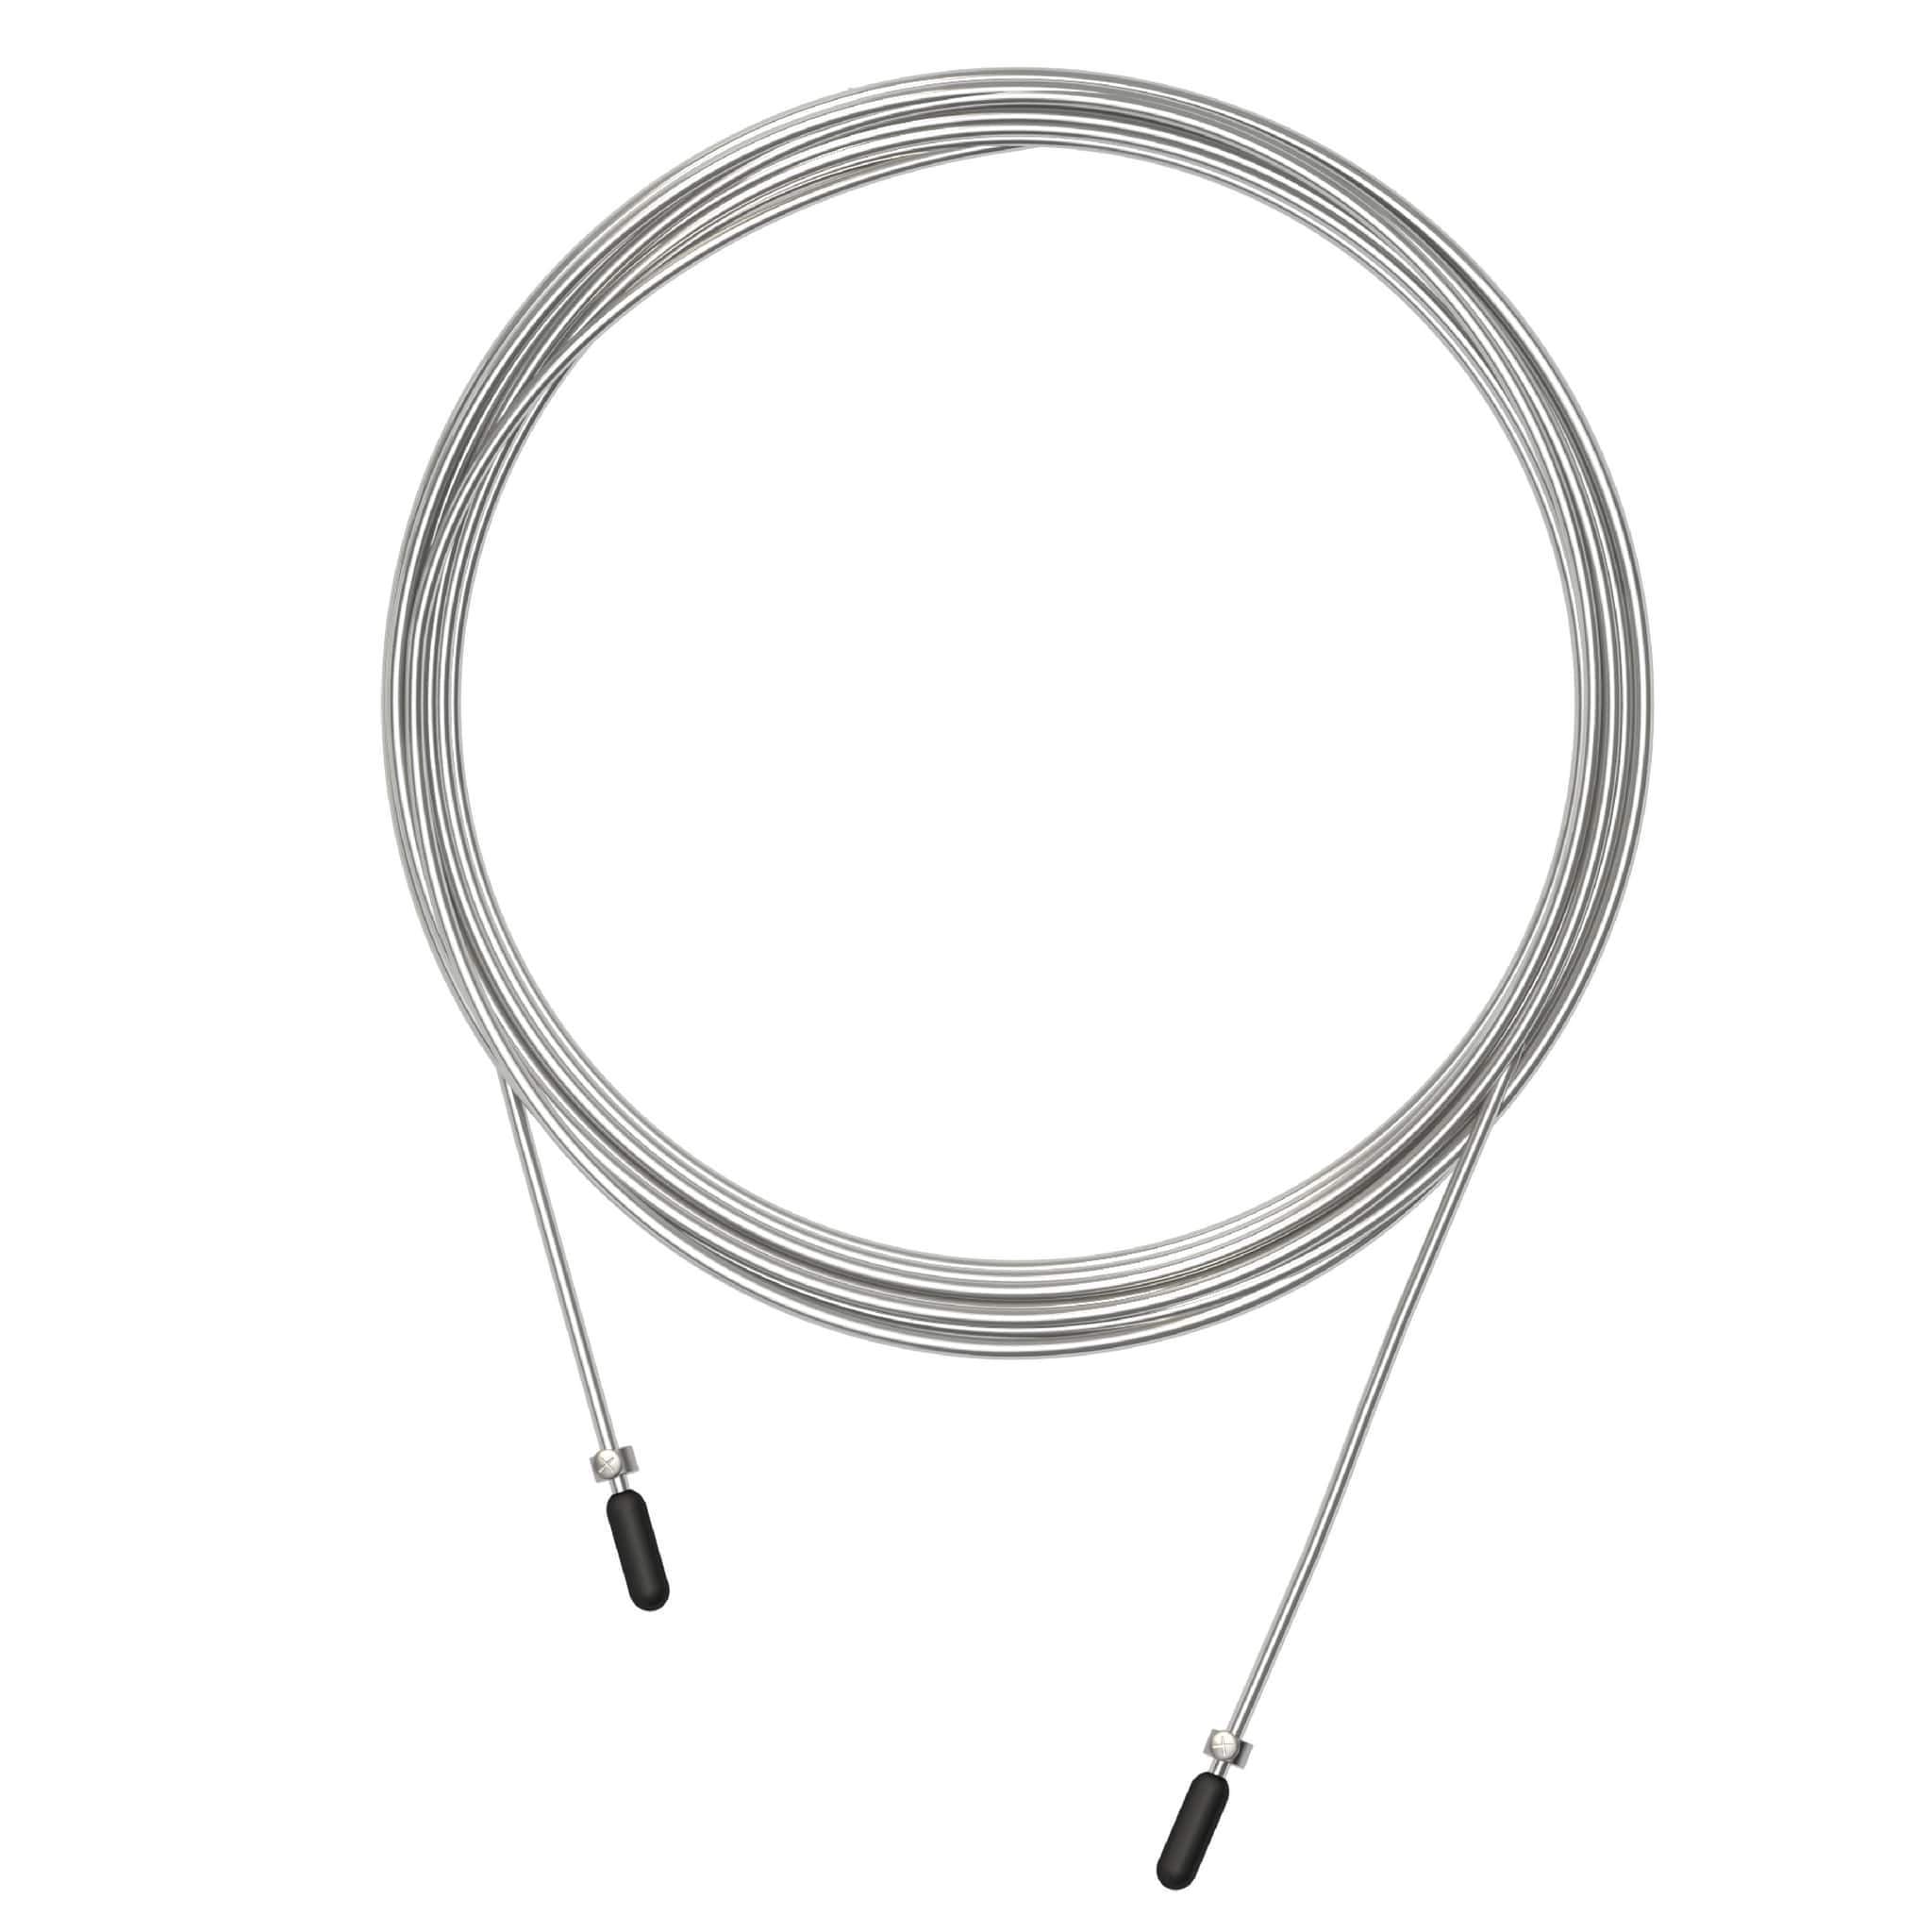 Competition Cable 1.8mm I jump rope replacement